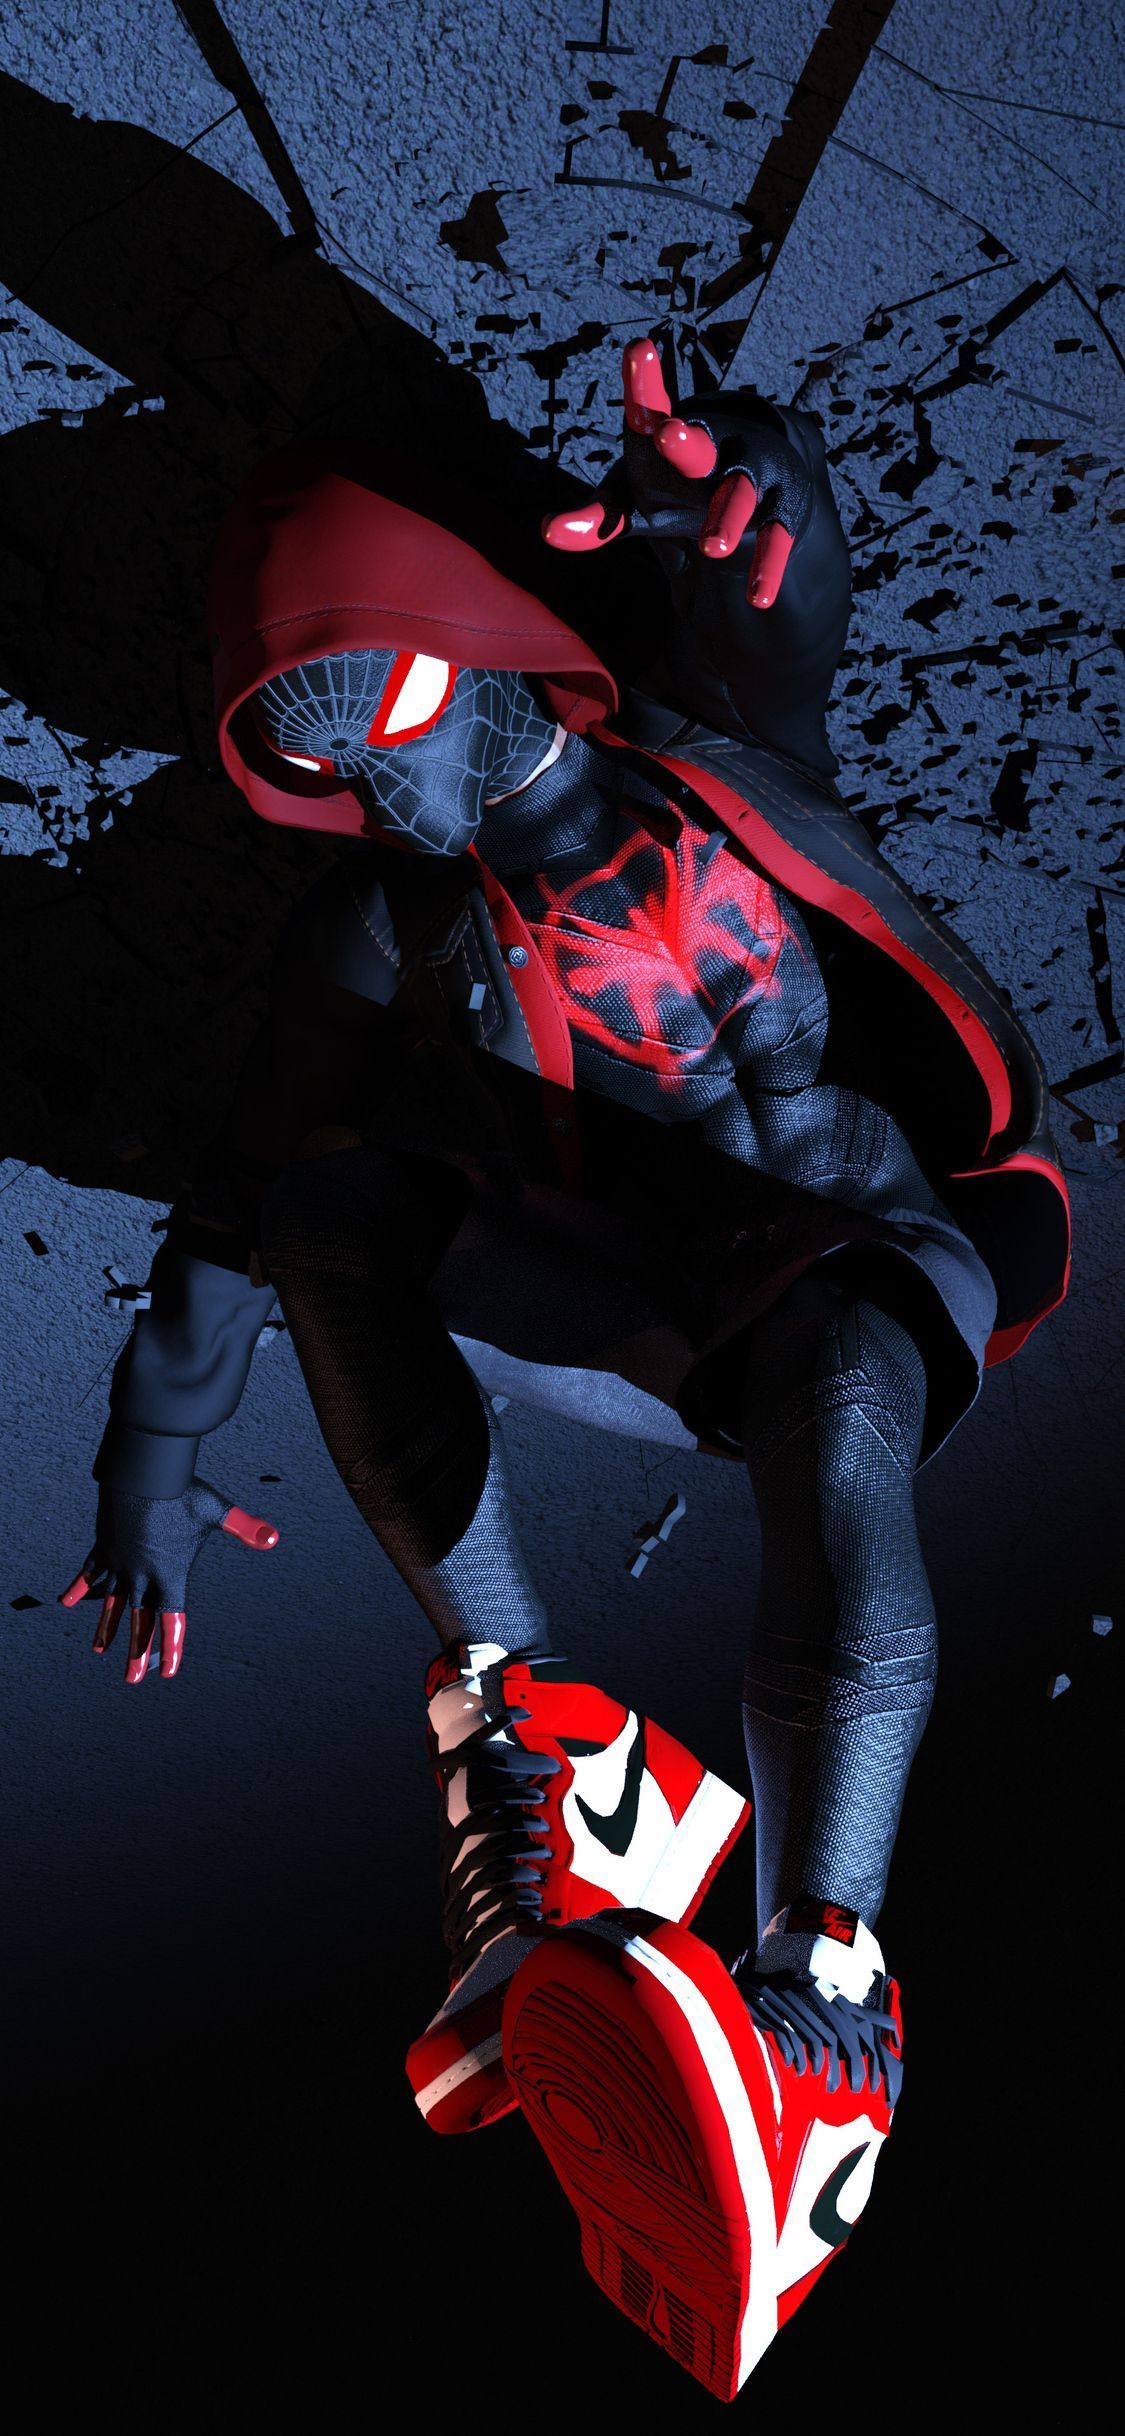 Miles Morales iPhone Wallpaper Free Miles Morales iPhone Background